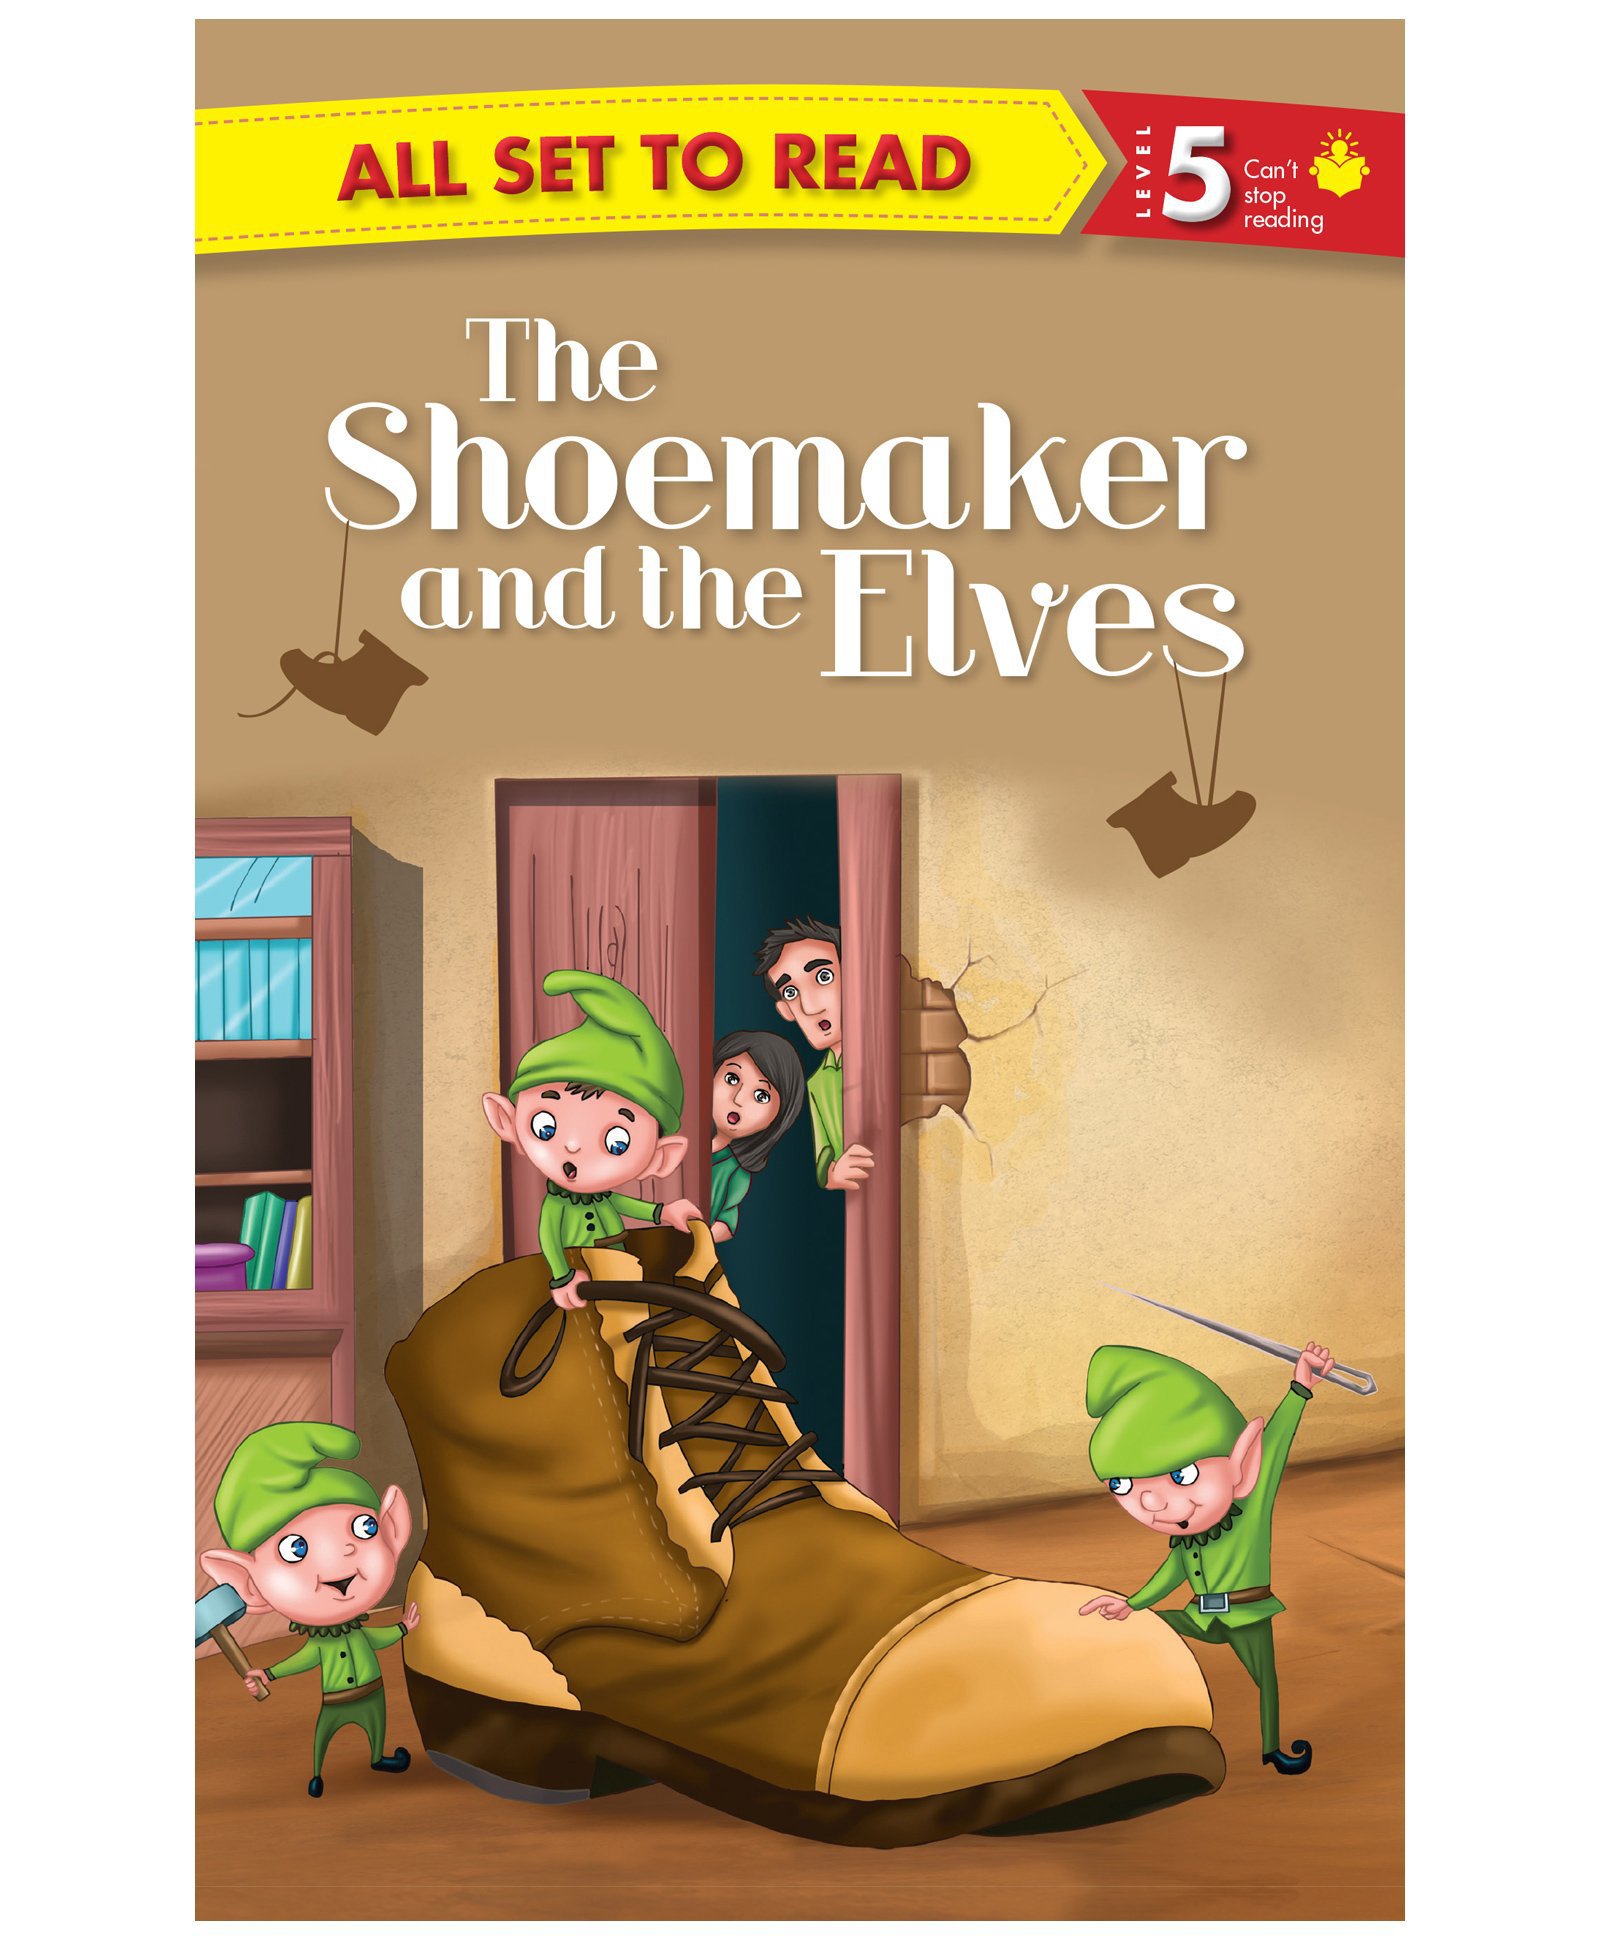 All Set To Read Readers Level 5 The Shoemaker And The Elves Book - English  Online in India, Buy at Best Price from  - 8800479